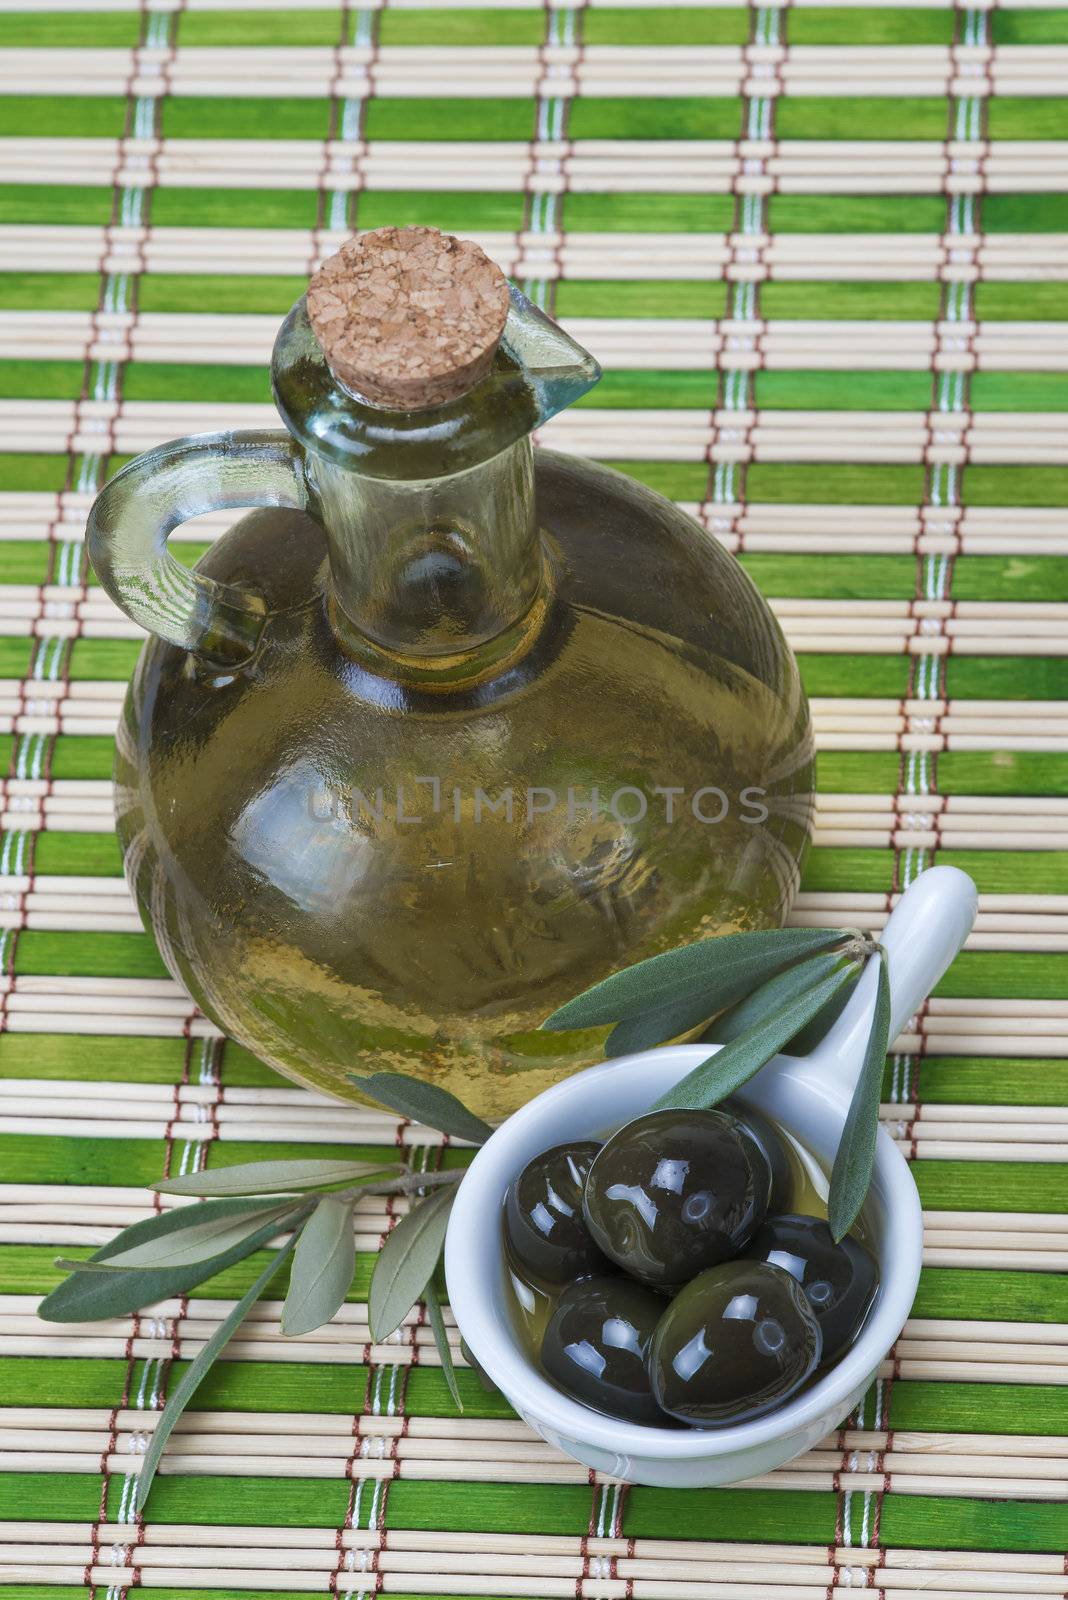 A bottle of olive oil  and a china spoon with olives on a bamboo mat